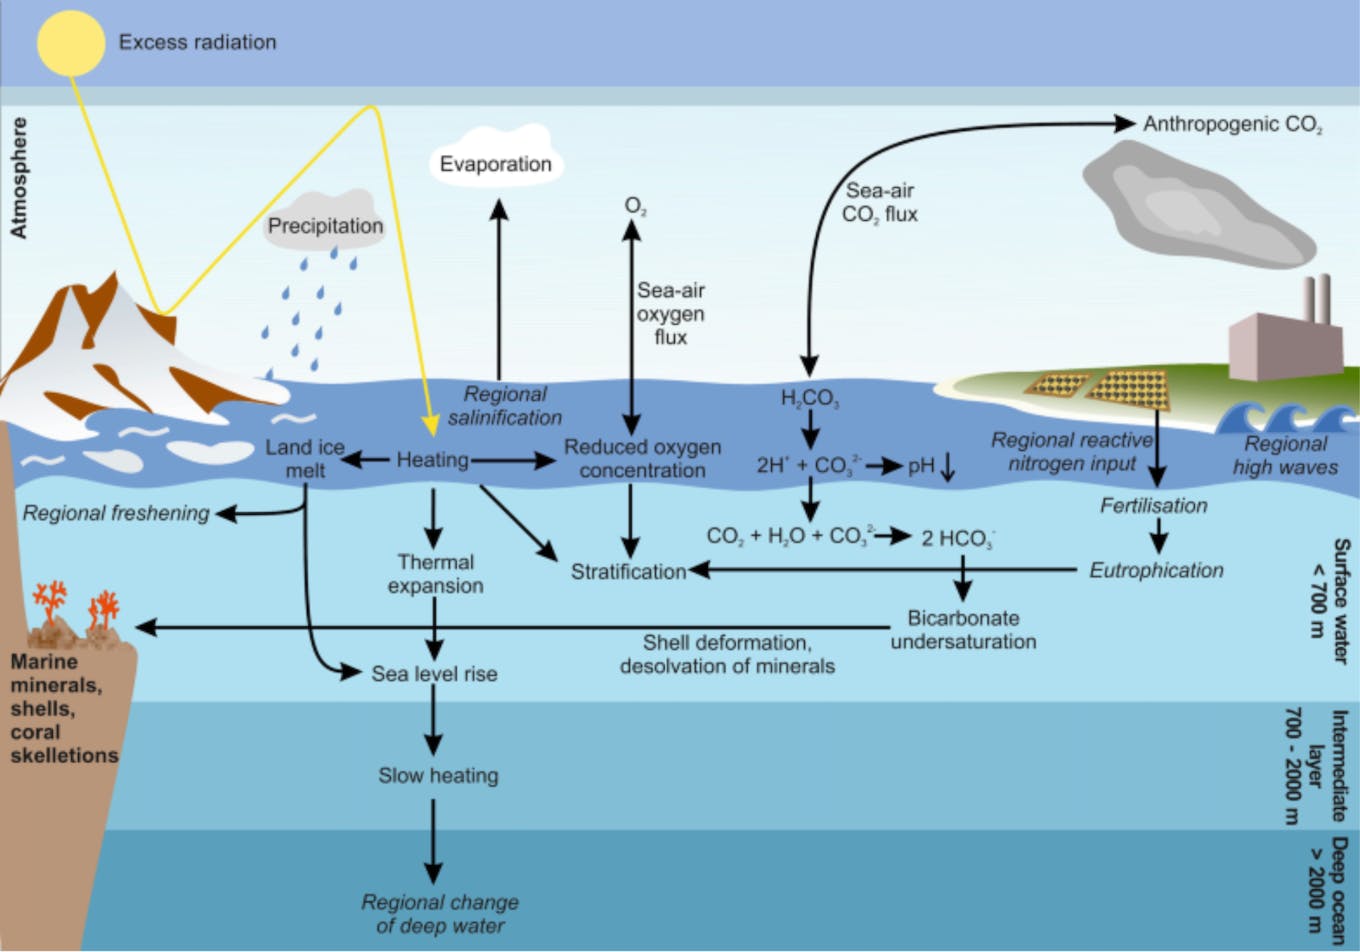 Overview of climatic changes and their effects on the oceans.